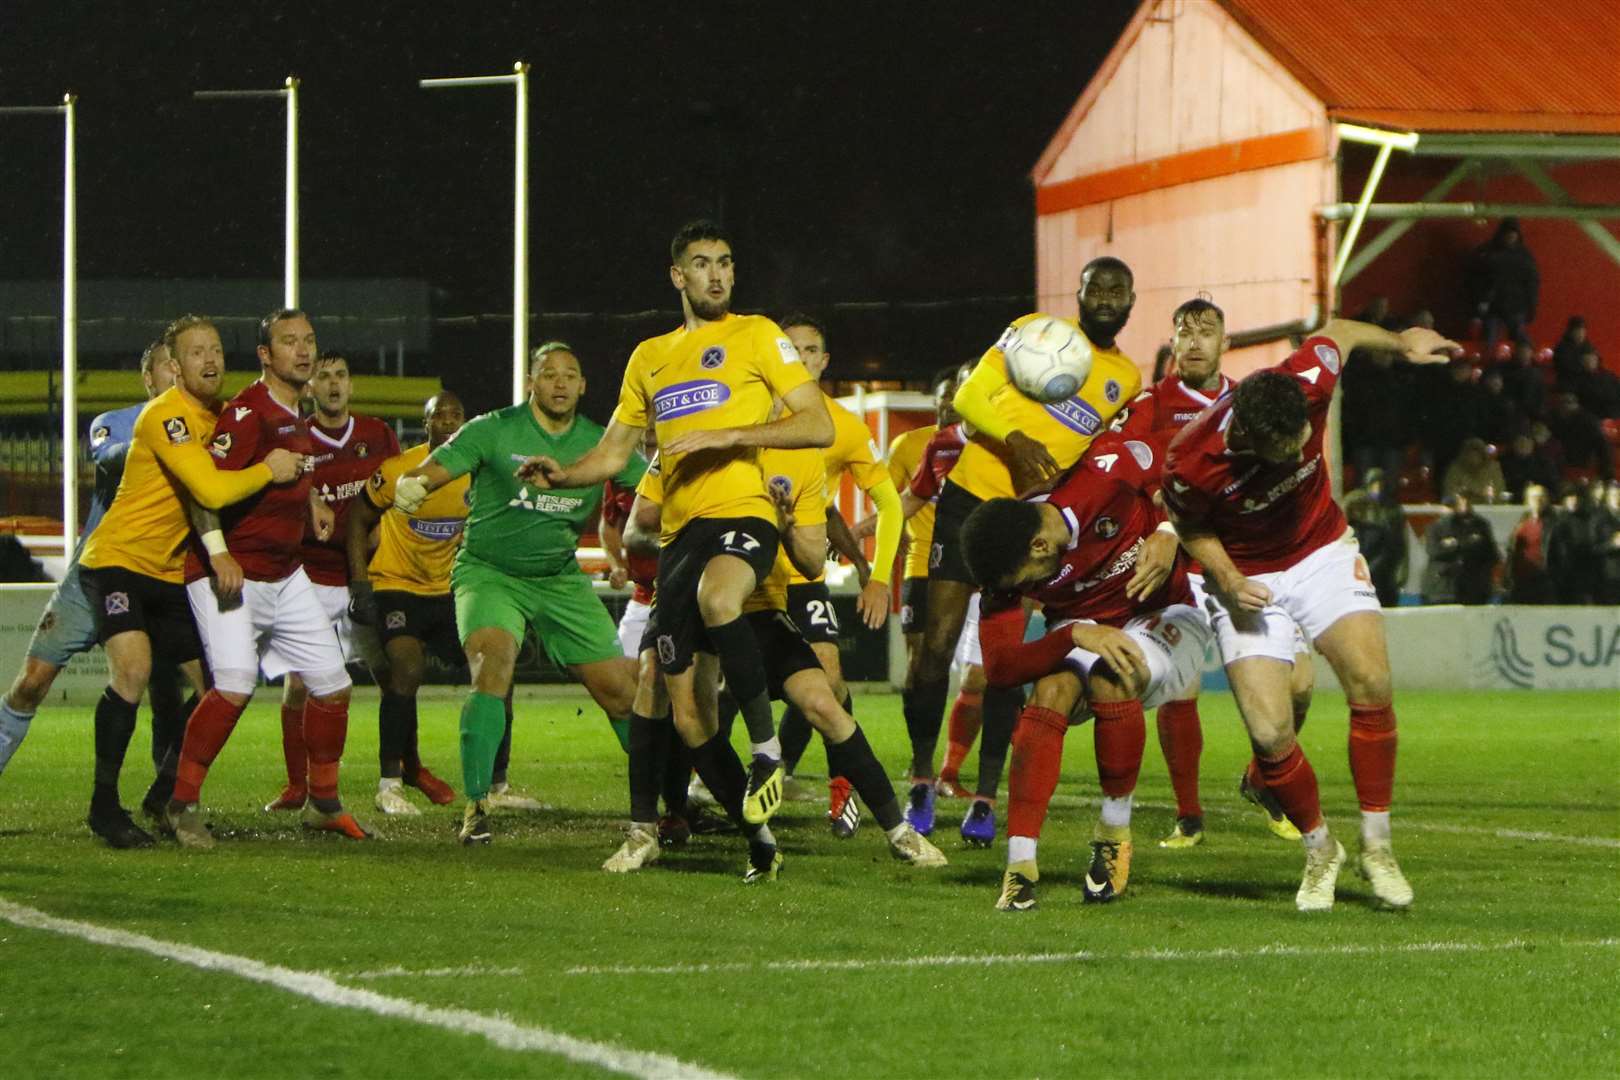 Ebbsfleet United hit some financial difficulties this year